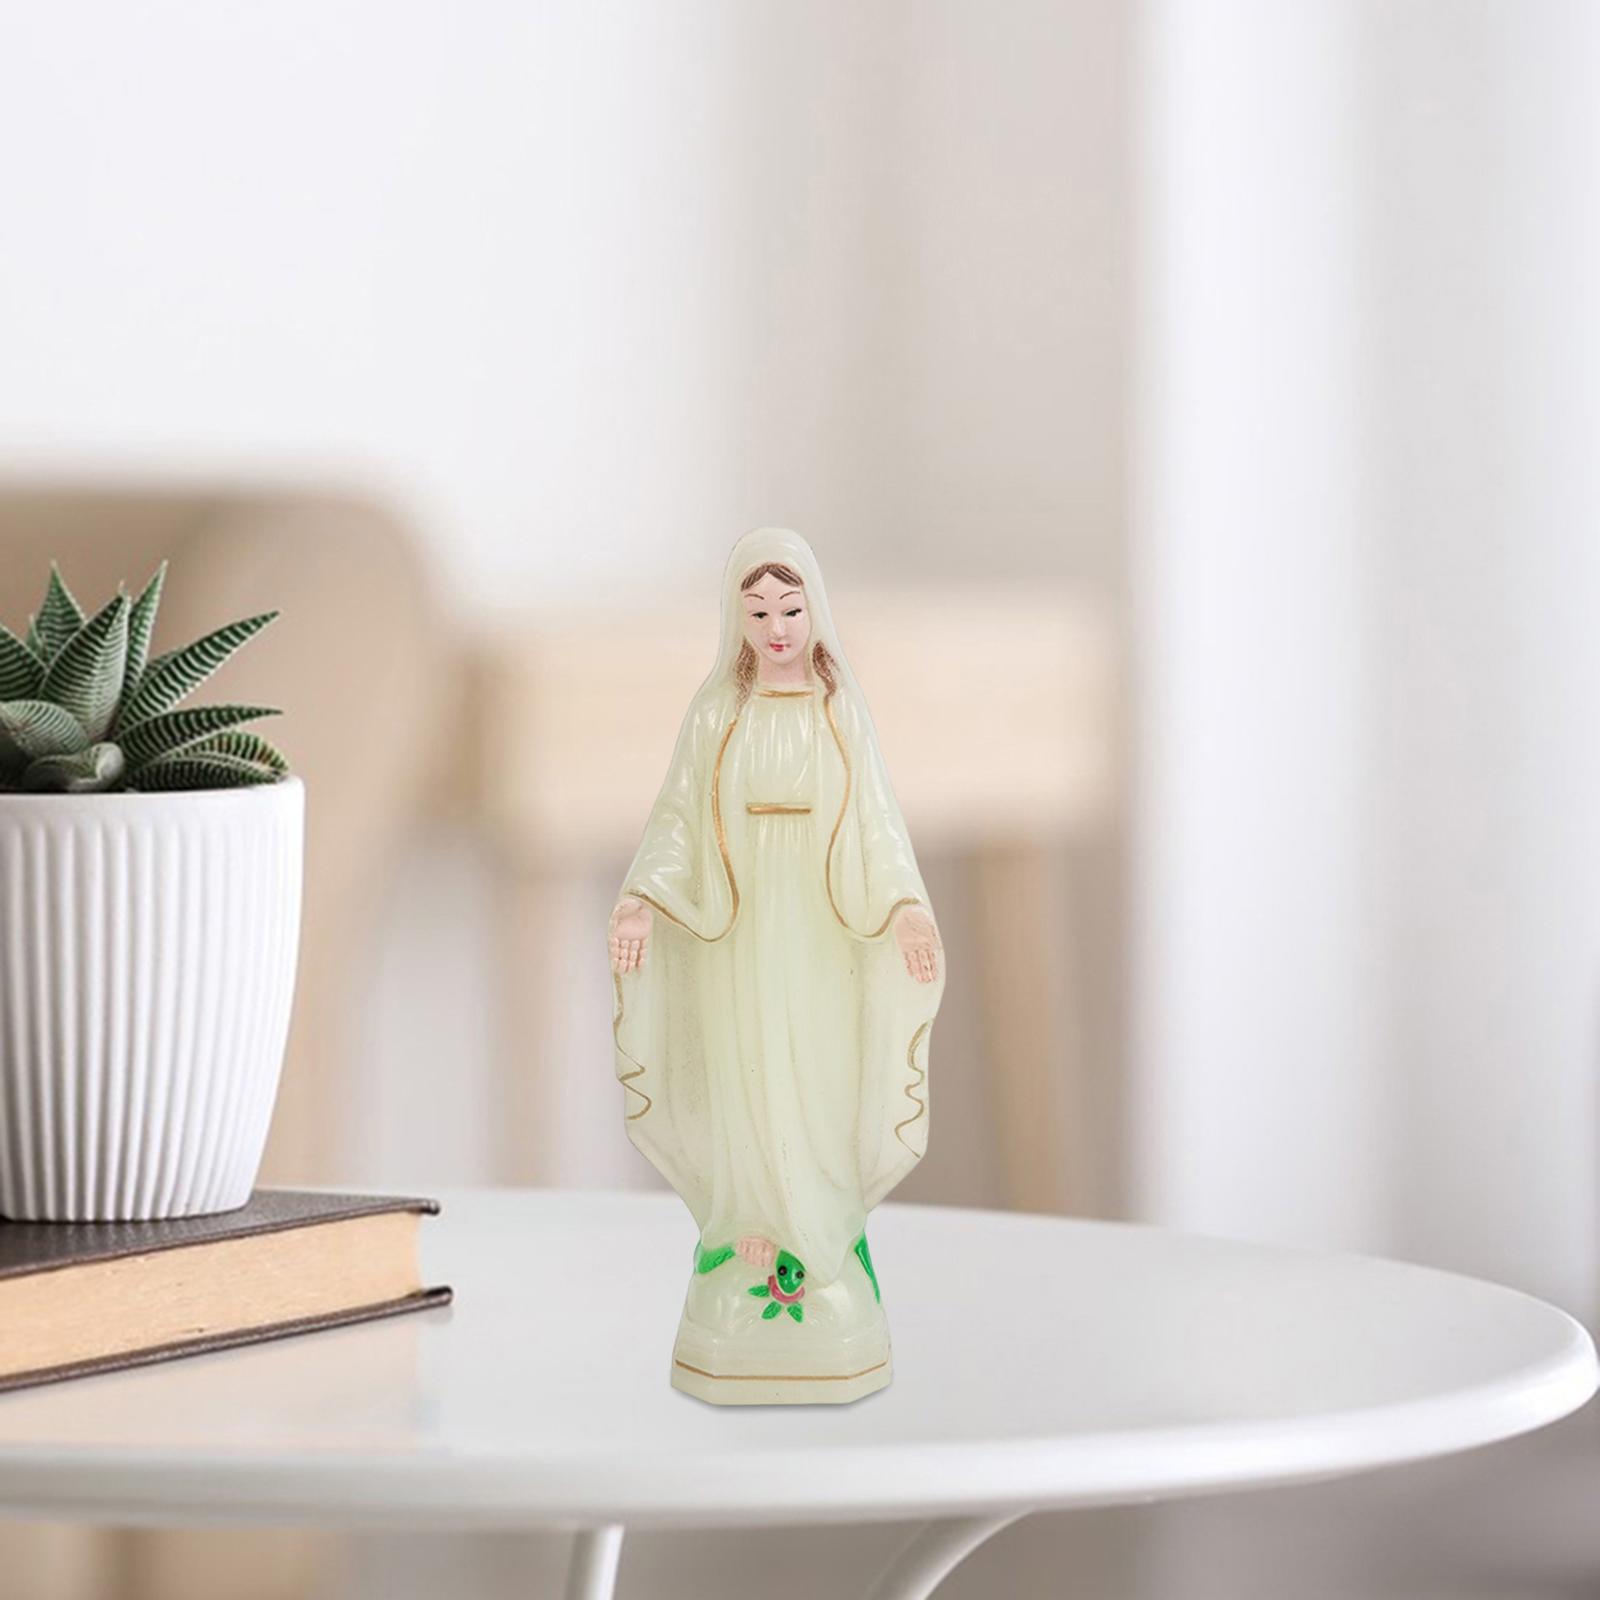 Blessed Virgin Mary Figurine Character Sculpture Statue Decoration 10cm Luminous